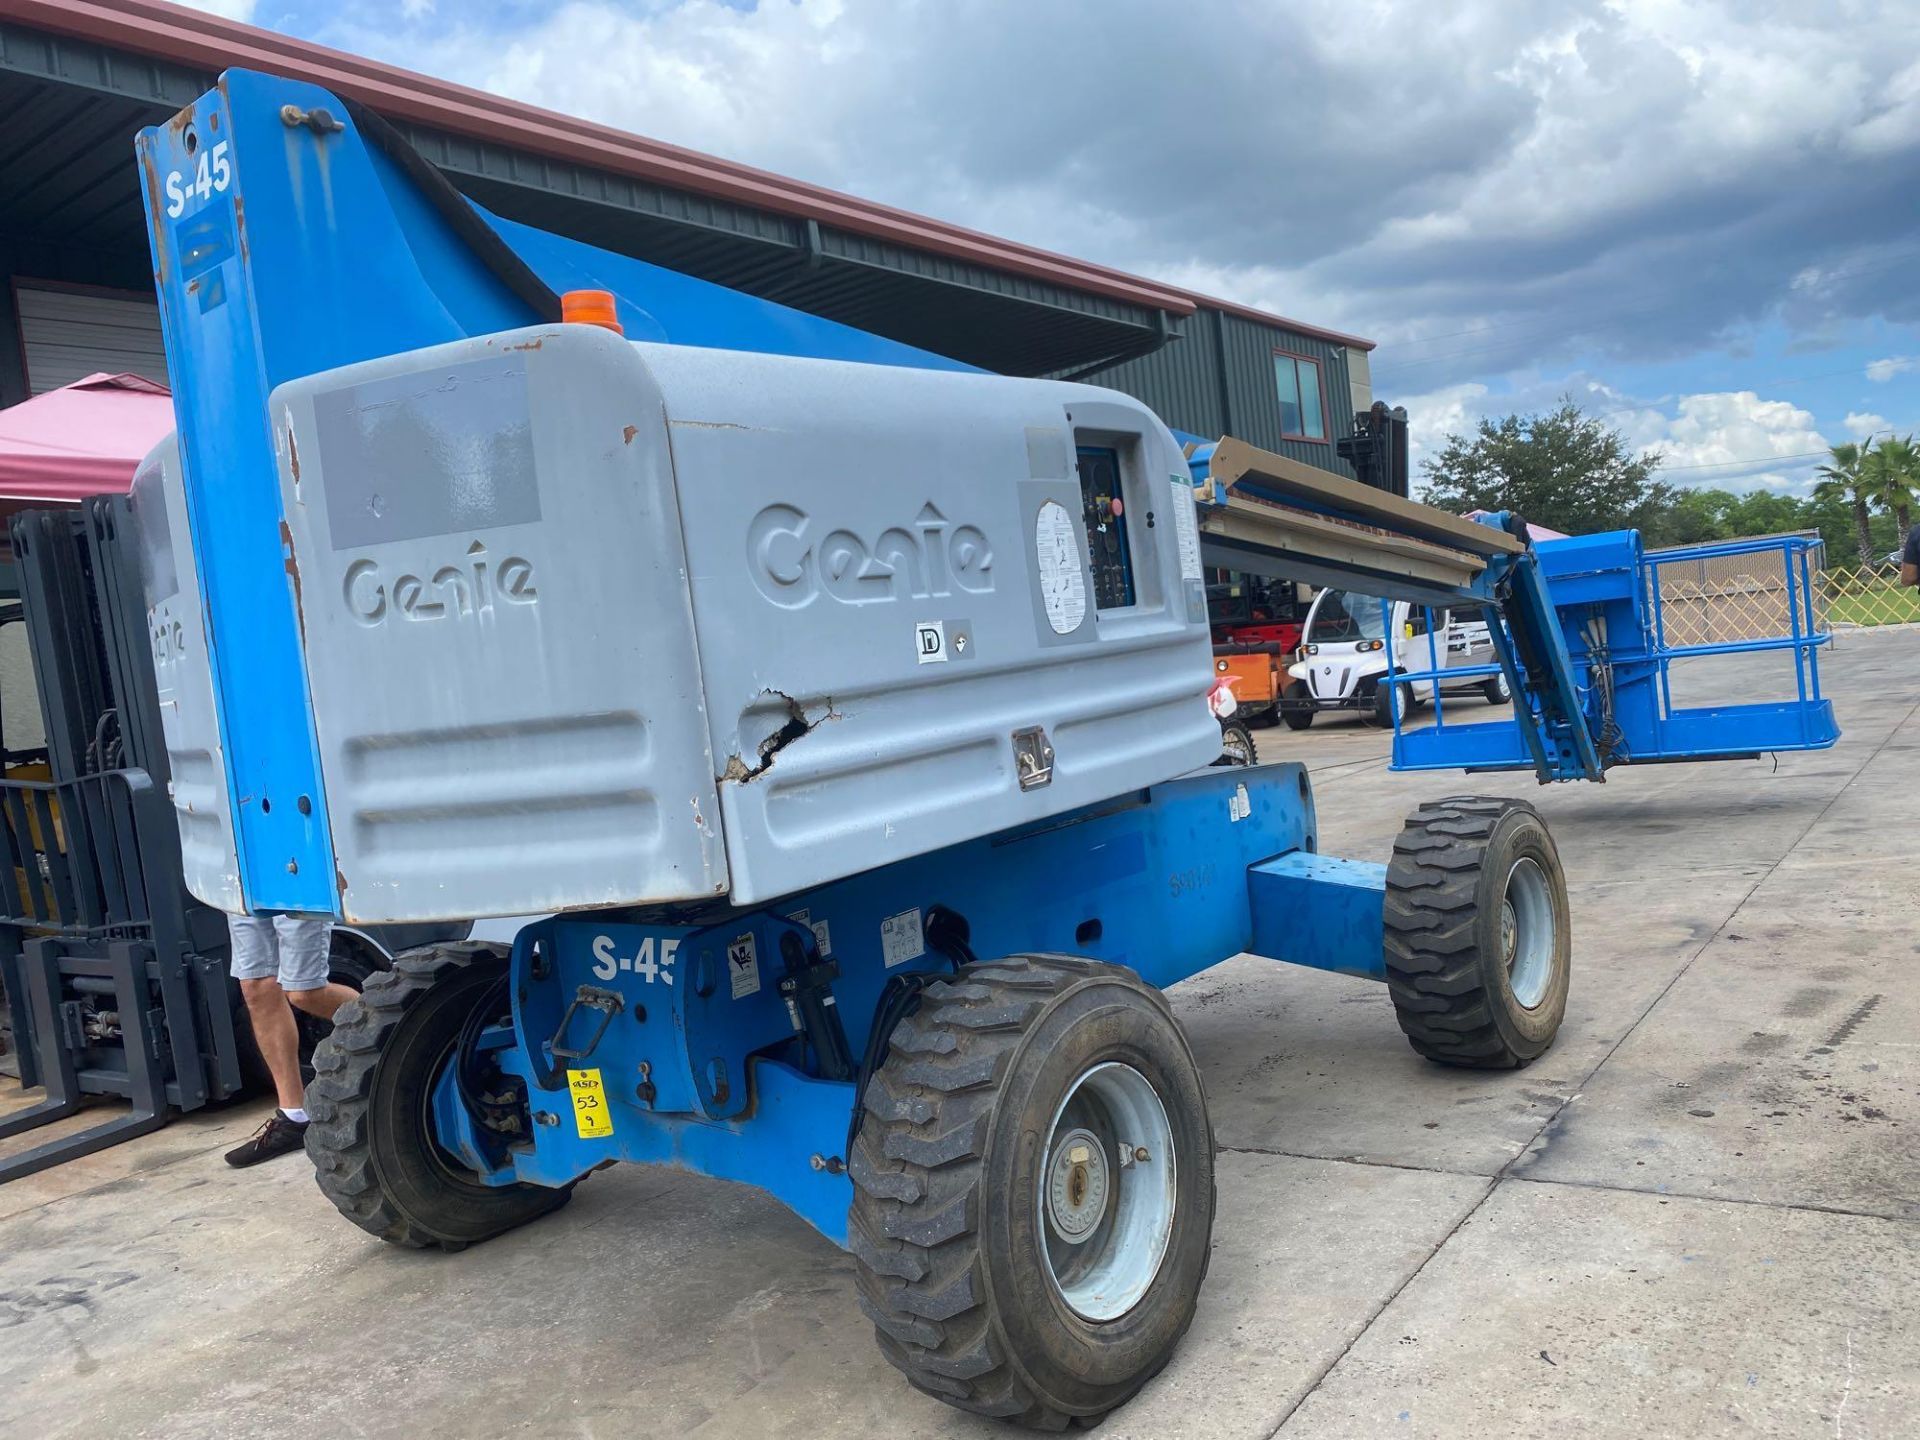 GENIE S-45 ARTICULATING DIESEL BOOM LIFT, 4x4, 45' PLATFORM HEIGHT, RUNS AND OPERATES - Image 4 of 12